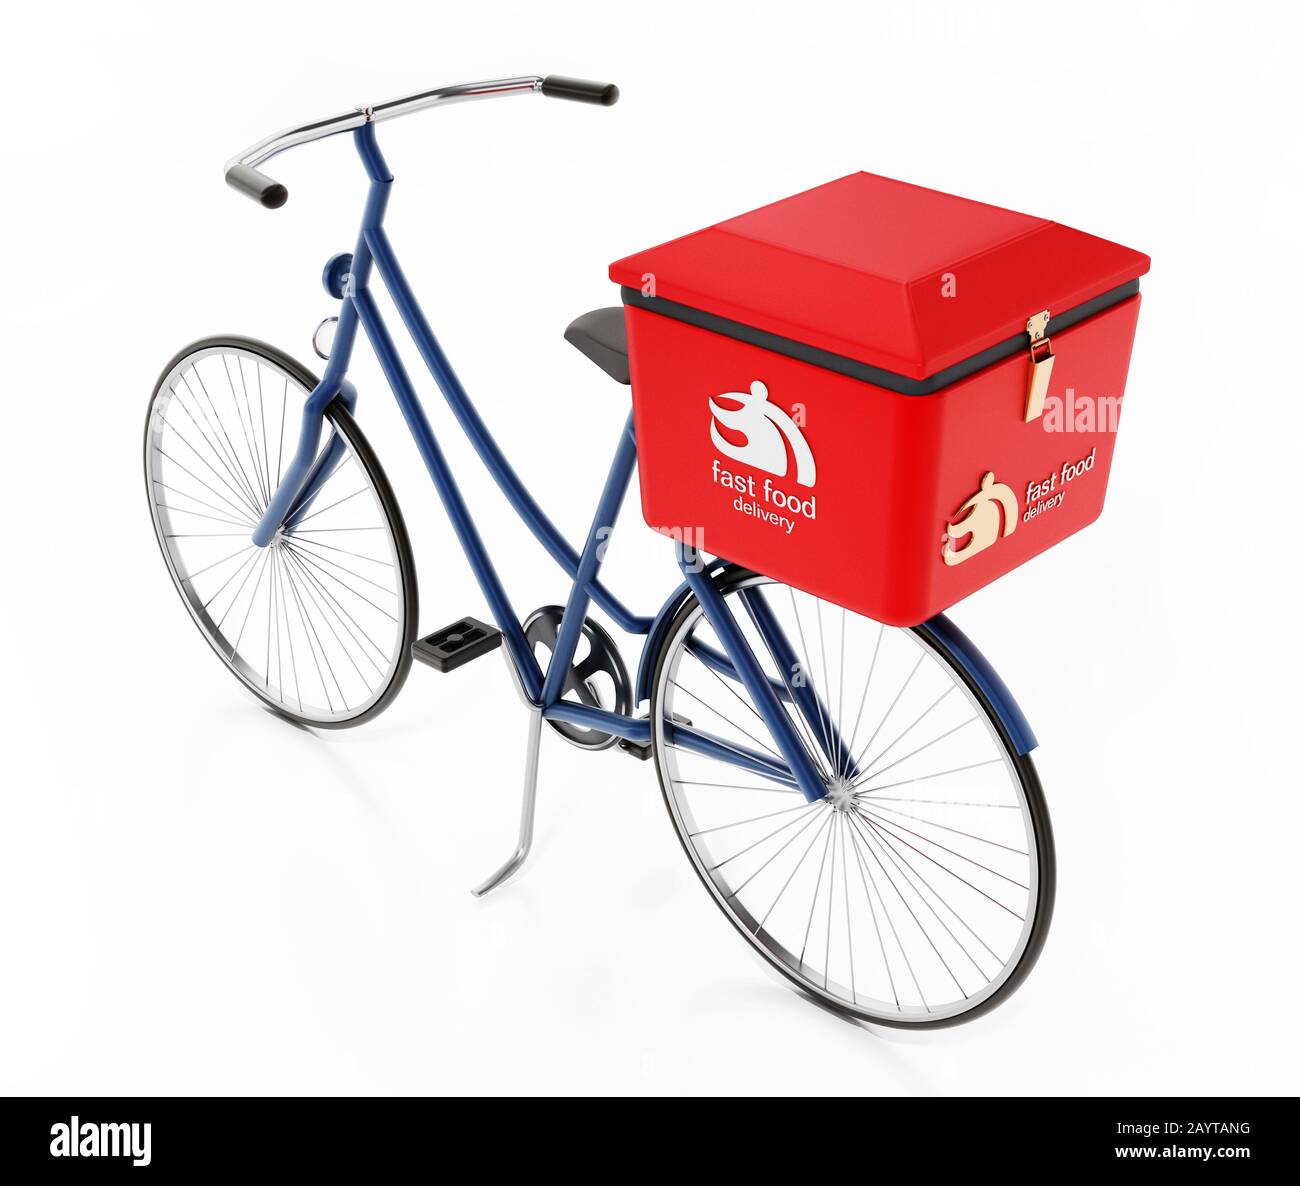 Fast food delivery bicycle isolated on white background. 3D illustration. Stock Photo